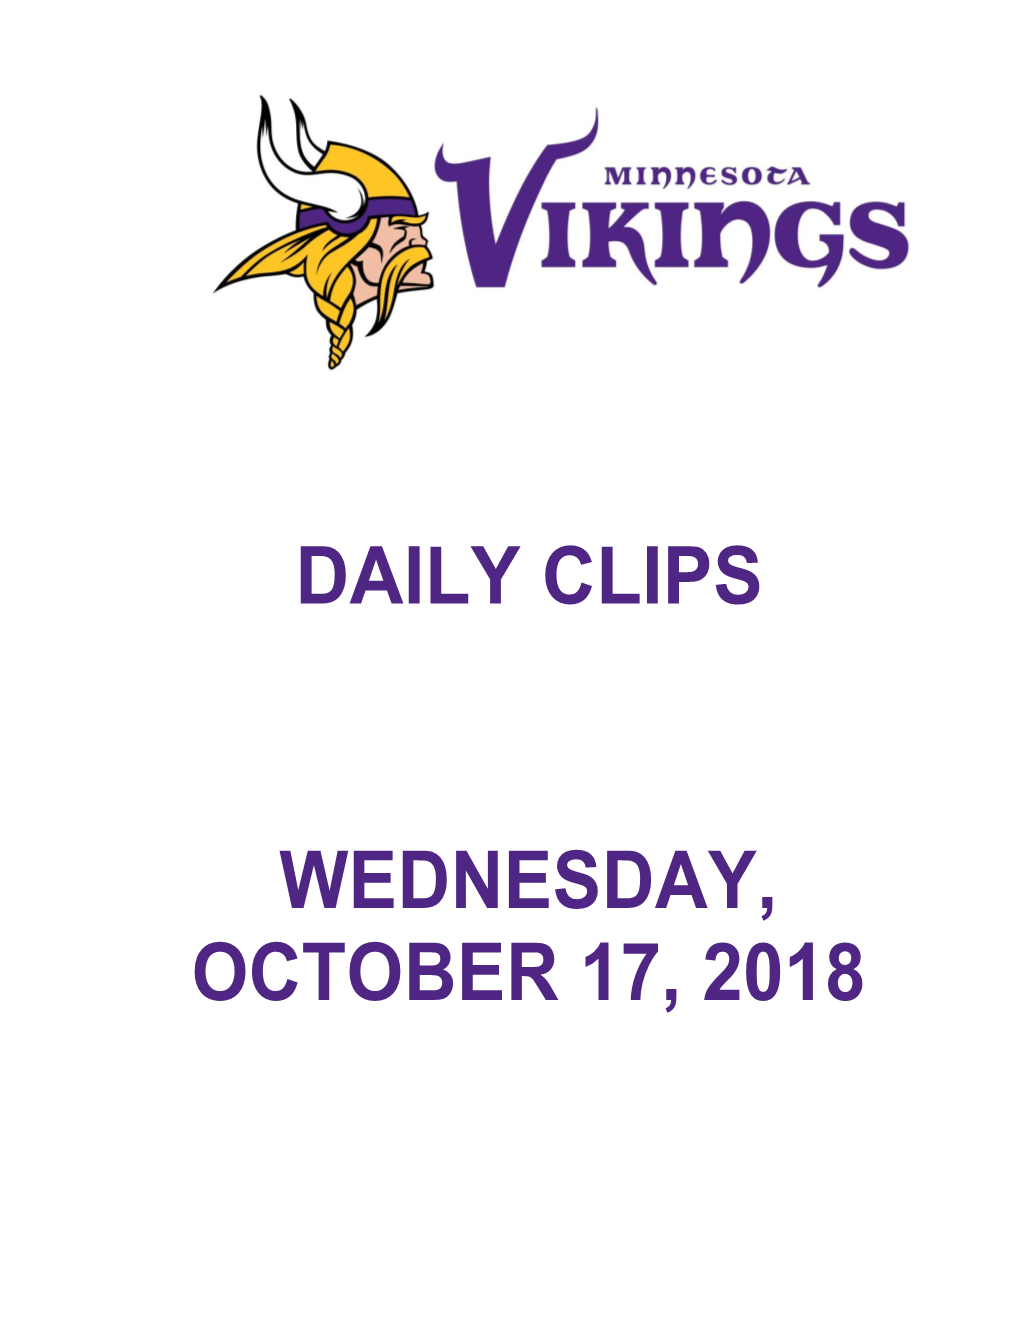 Daily Clips Wednesday, October 17, 2018